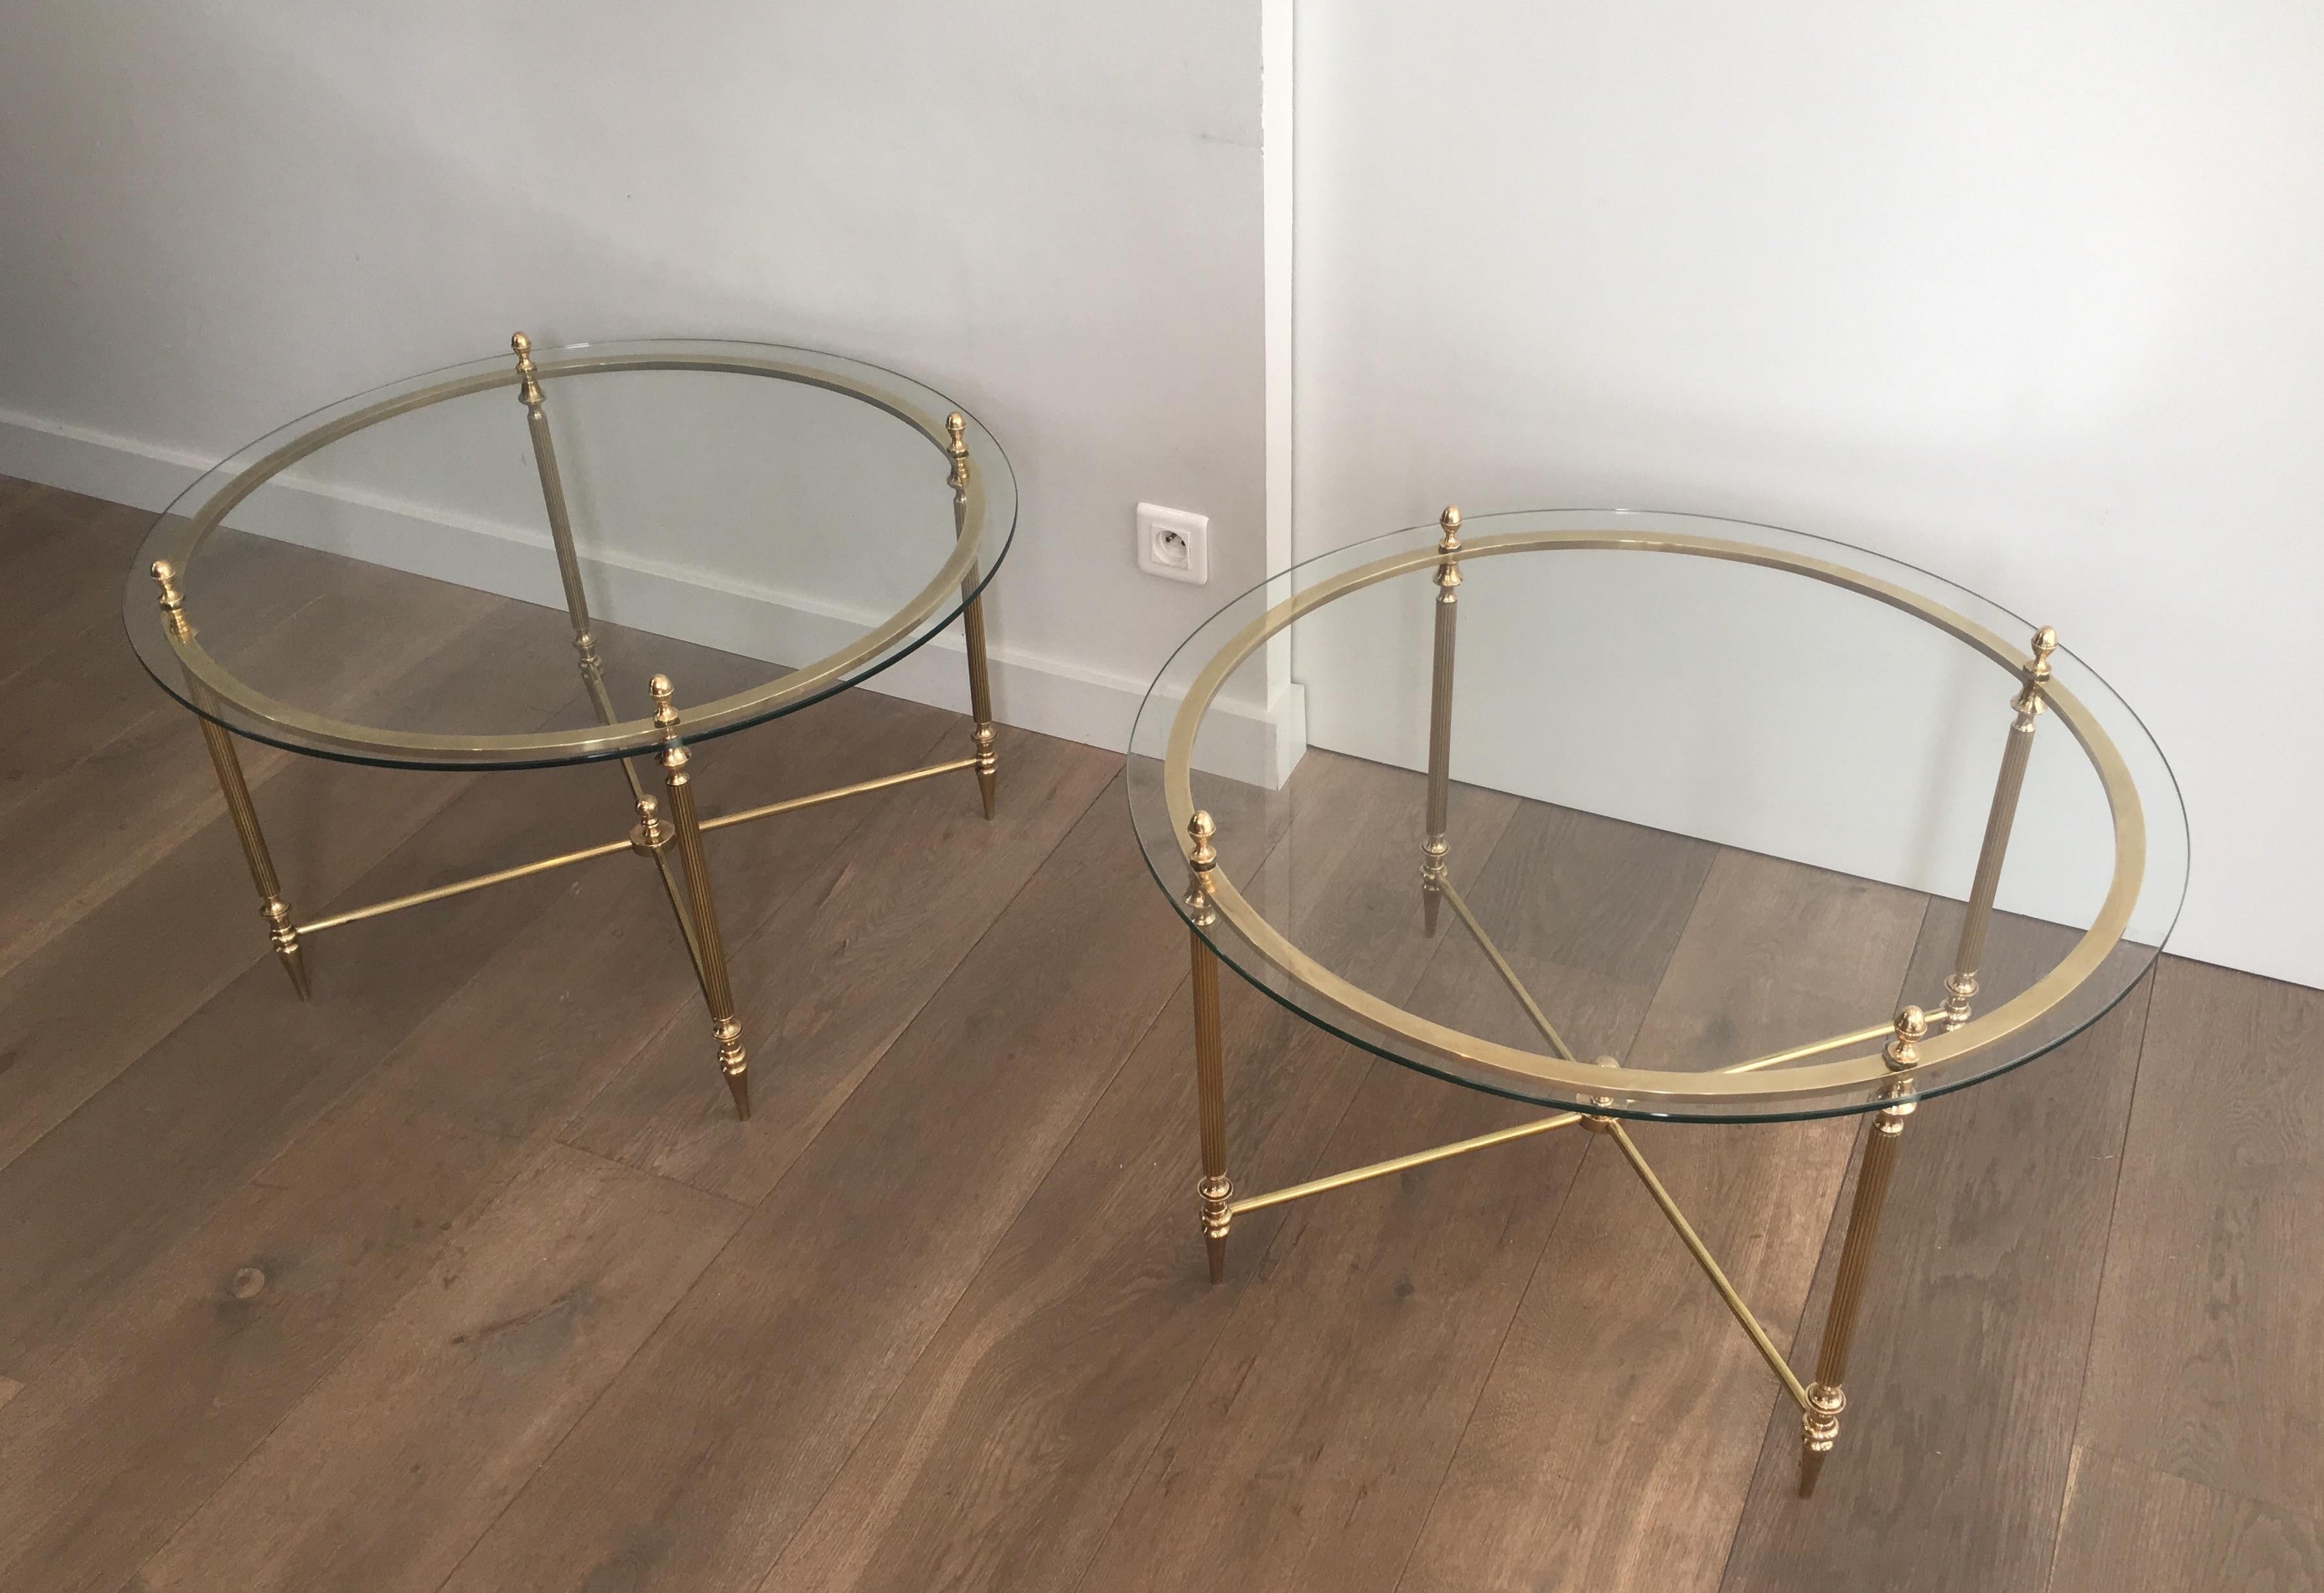 This rare pair of neoclassical round side tables are made of brass with a clear glass top. These are very nice side tables by famous french designer Maison Bagués, circa 1940.